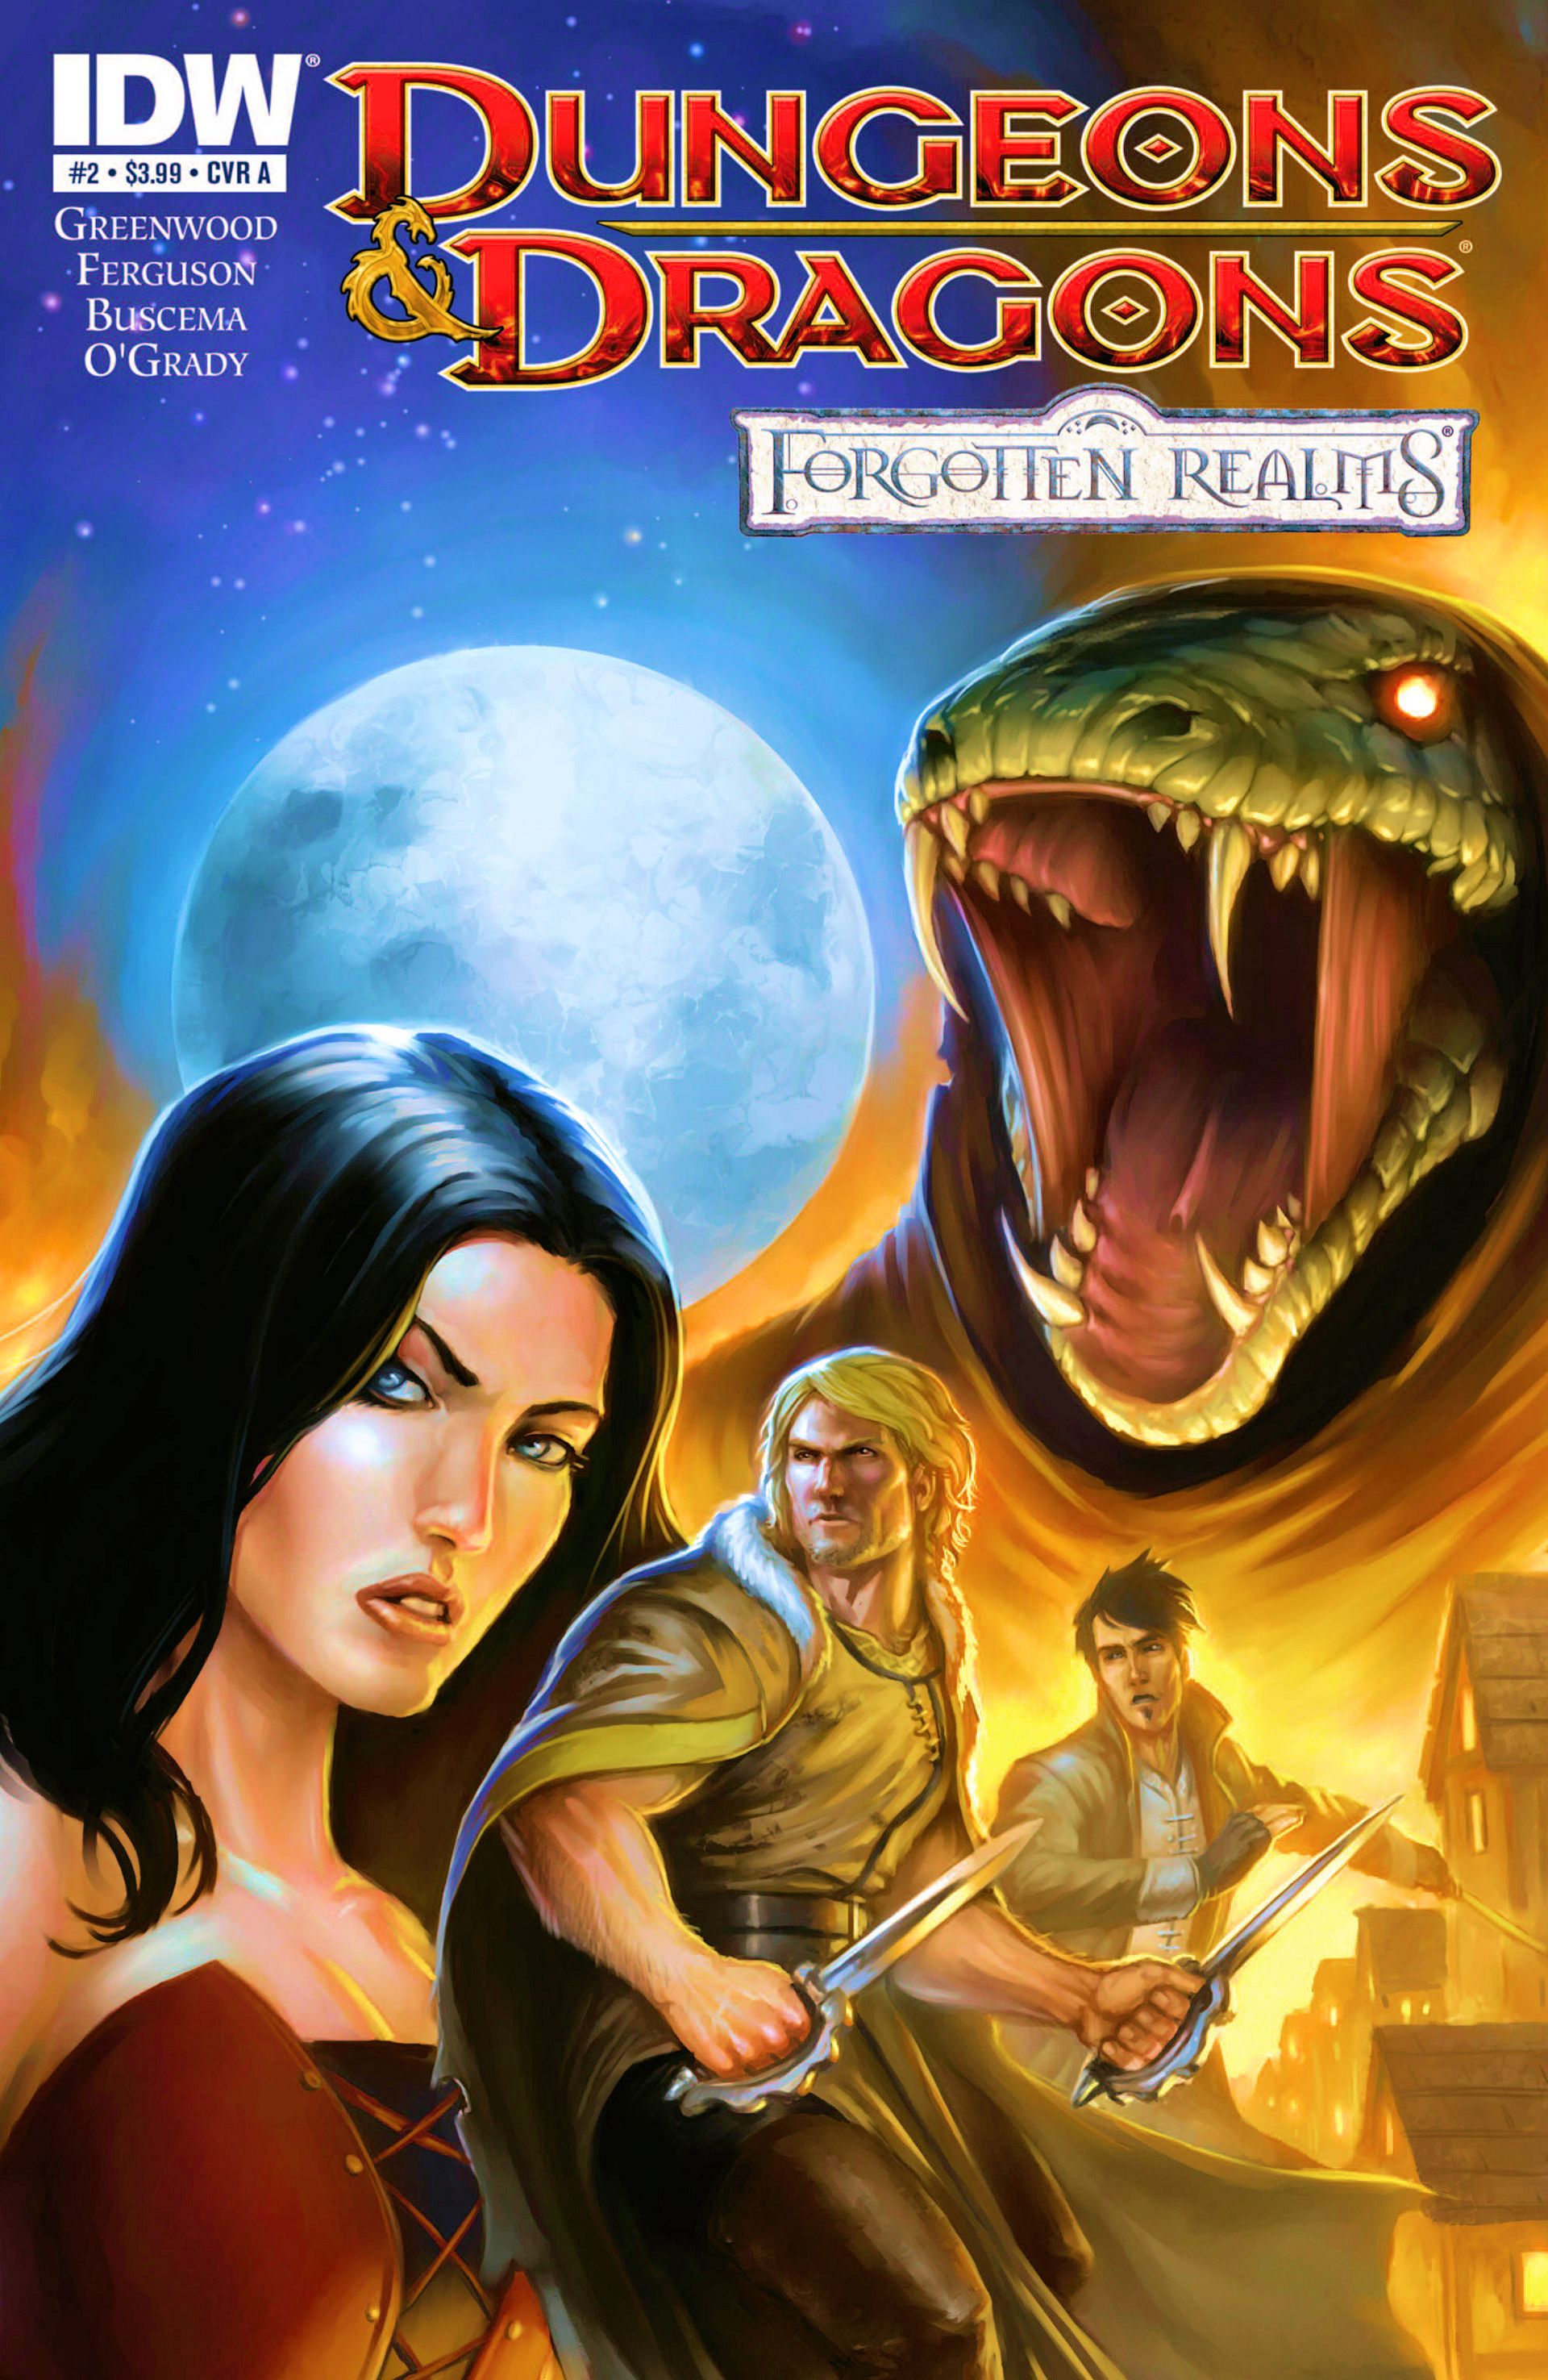 Read online Dungeons & Dragons: Forgotten Realms comic -  Issue #2 - 1